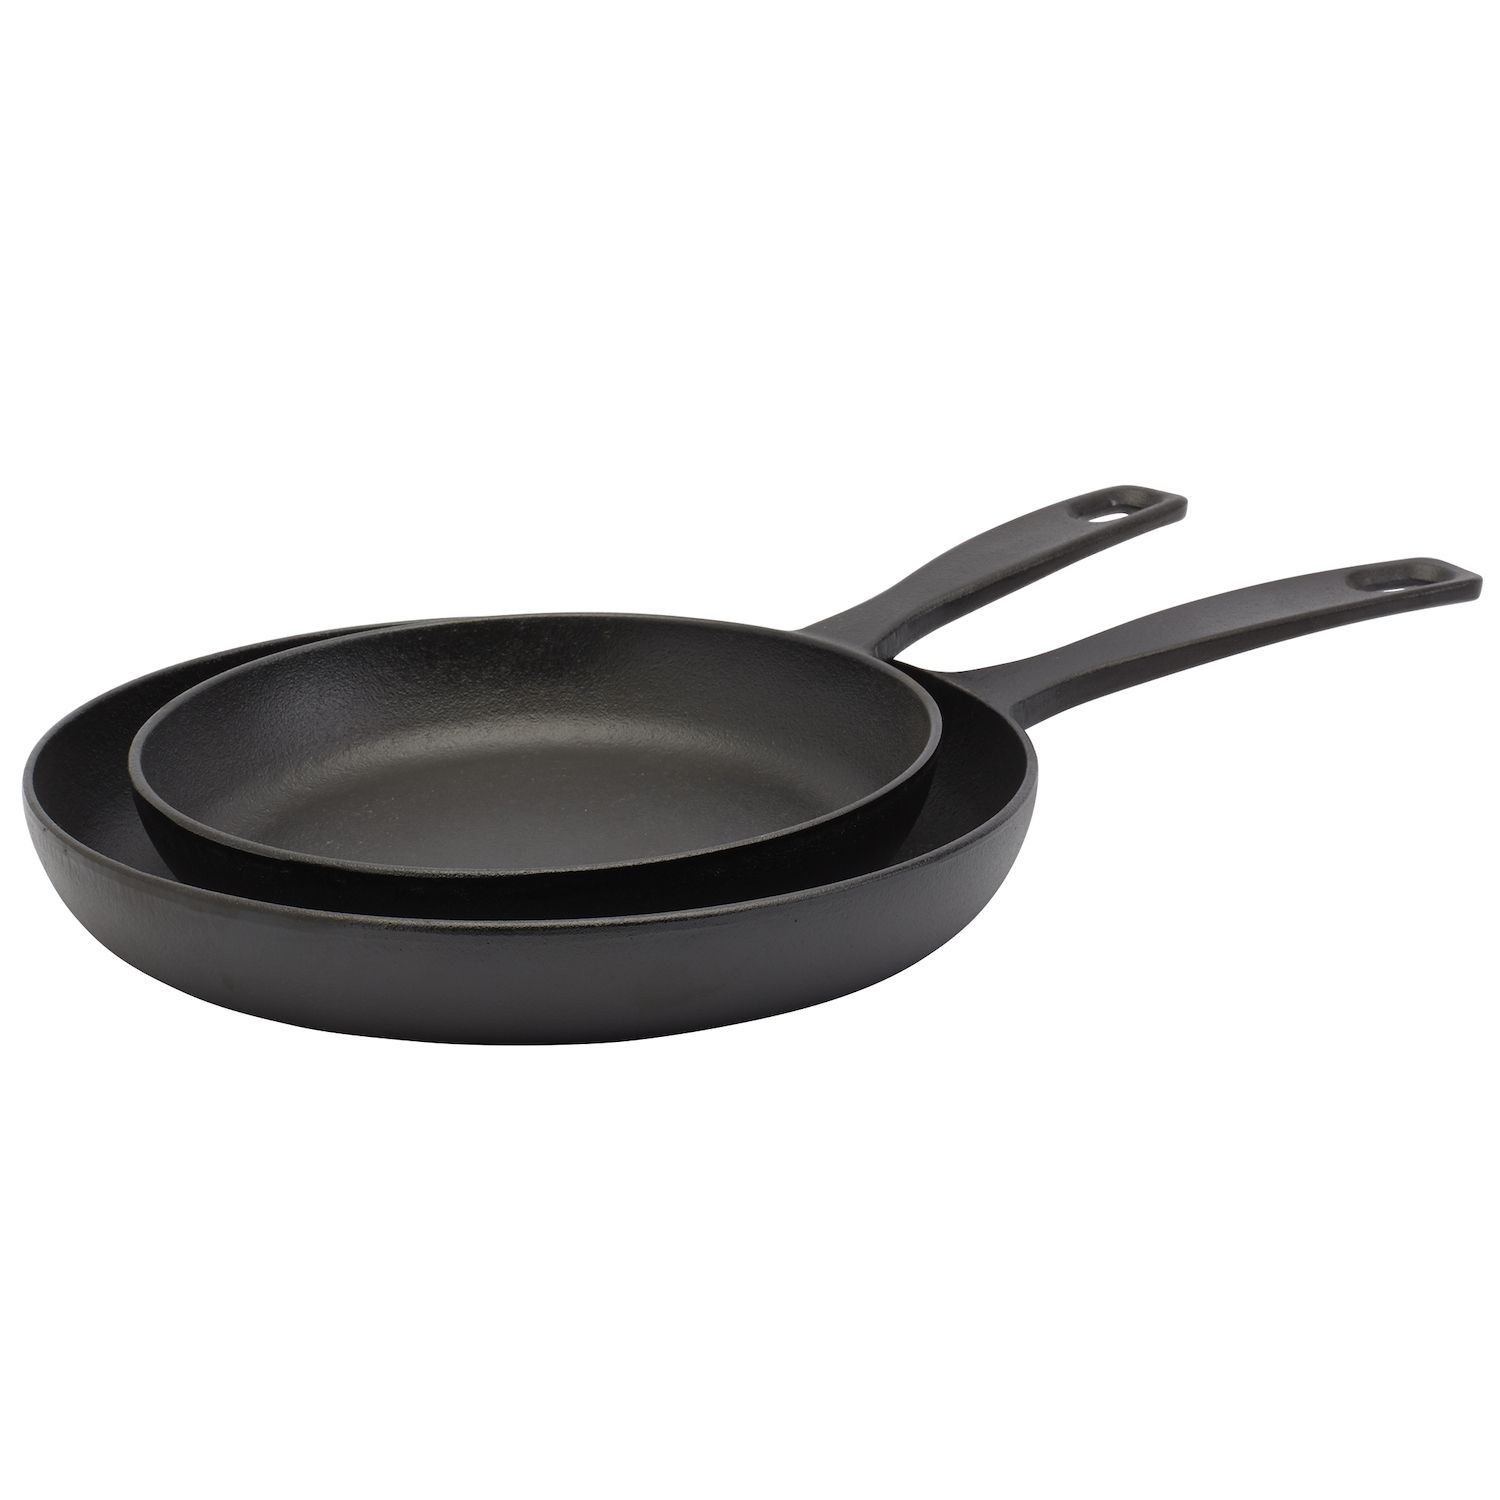 Food Network Textured Titanium Cookware Review - Consumer Reports